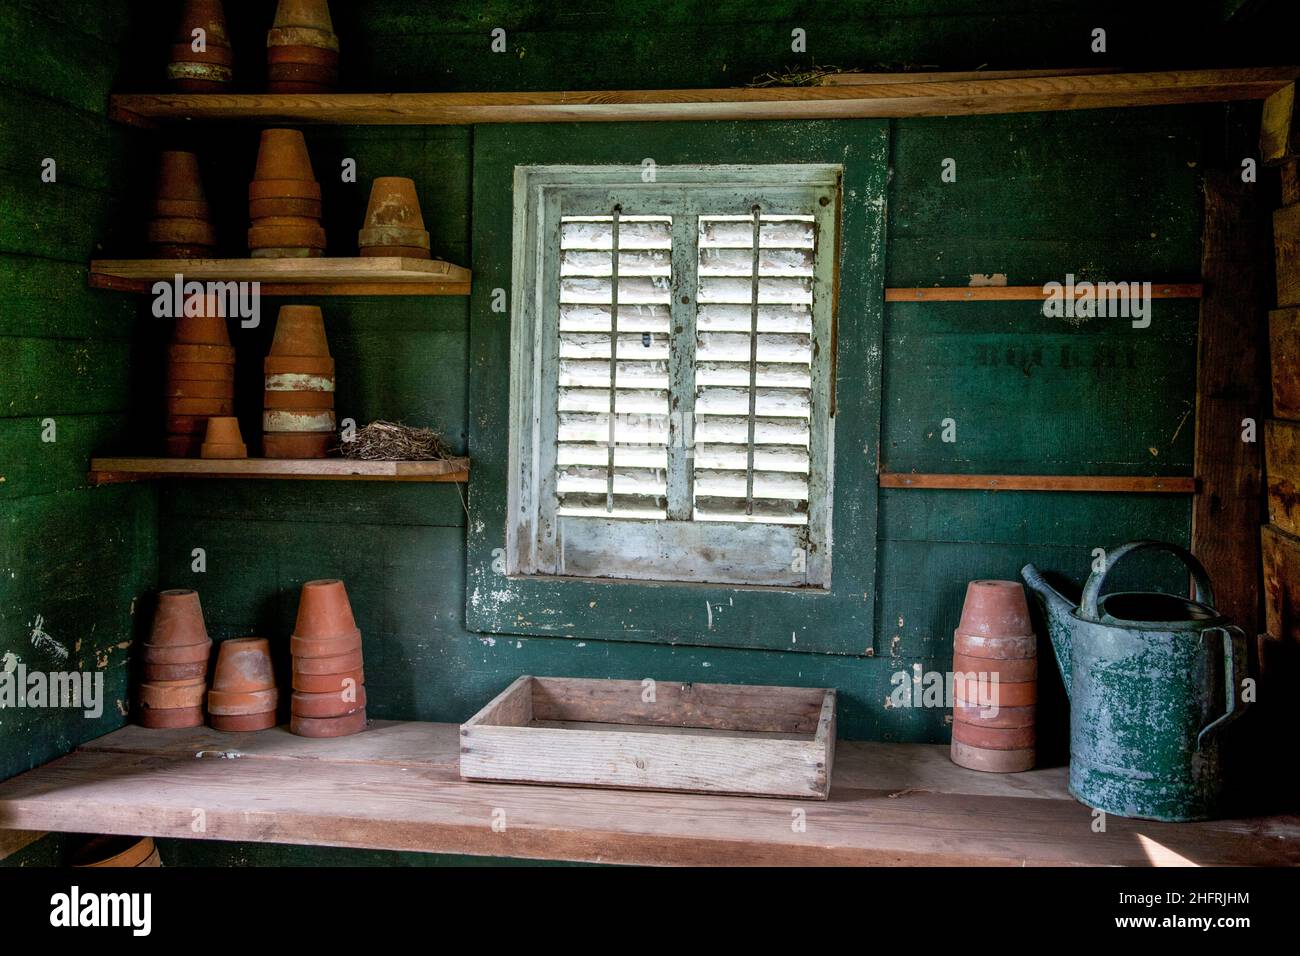 Inside potting shed with stacked terra cotta pots watering can, Walnford historic Farm & Mill, county park, Freehold Township, New Jersey, NJ, USA, US Stock Photo